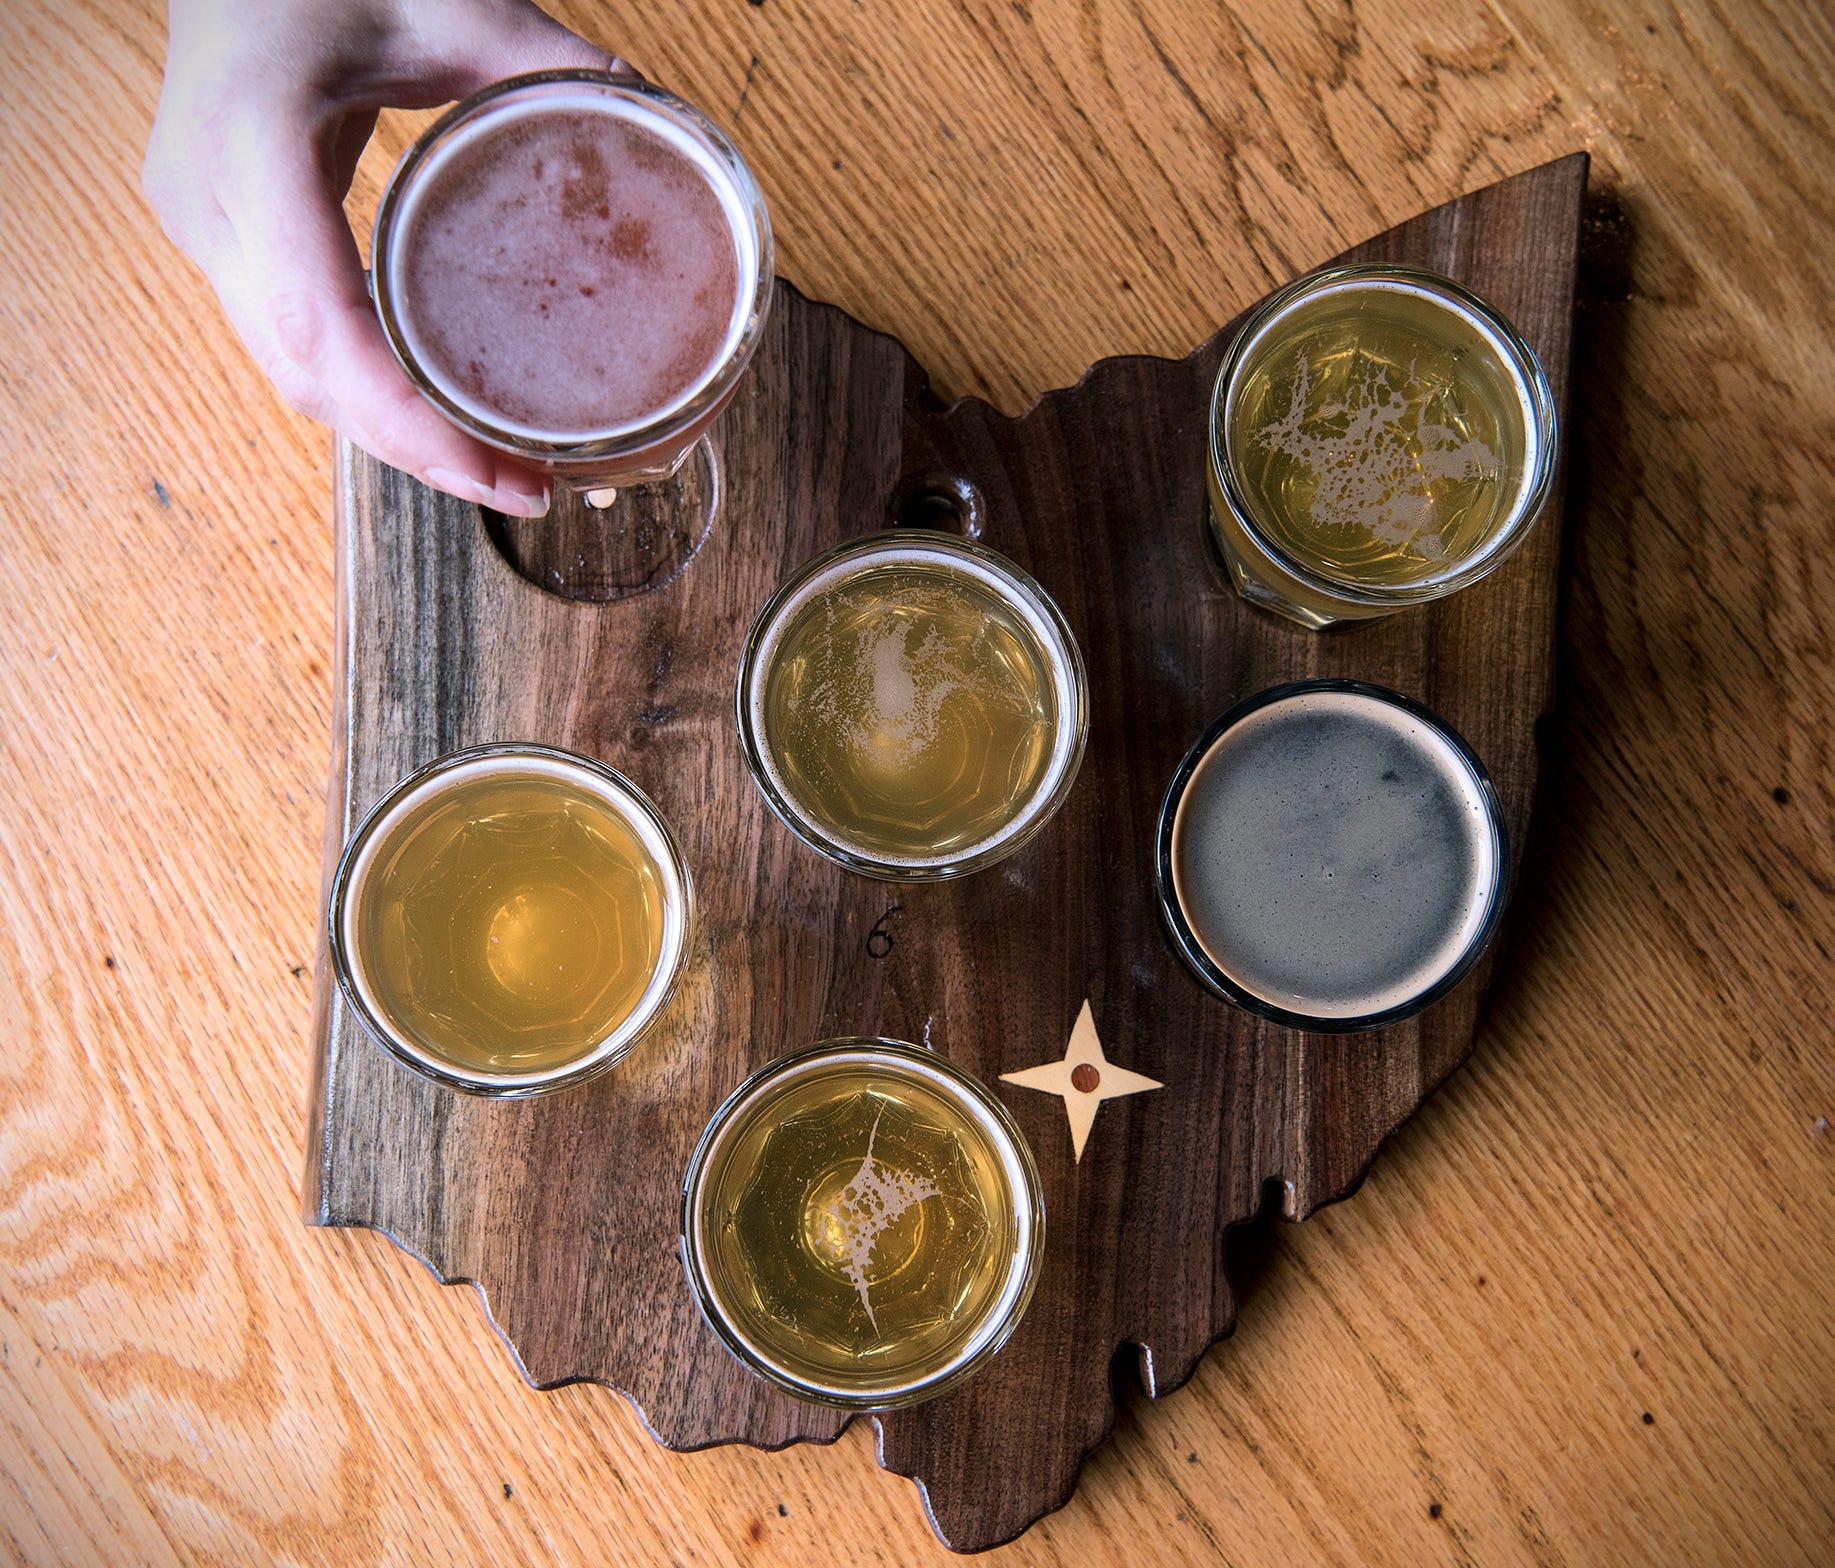 Ohio's Jackie O's Brewery has its own farm and uses local ingredients like wildflower honey and spruce tips. Visit the taproom (open daily), brewpub (Tuesday-Thursday) or Public House (open daily) in Athens.